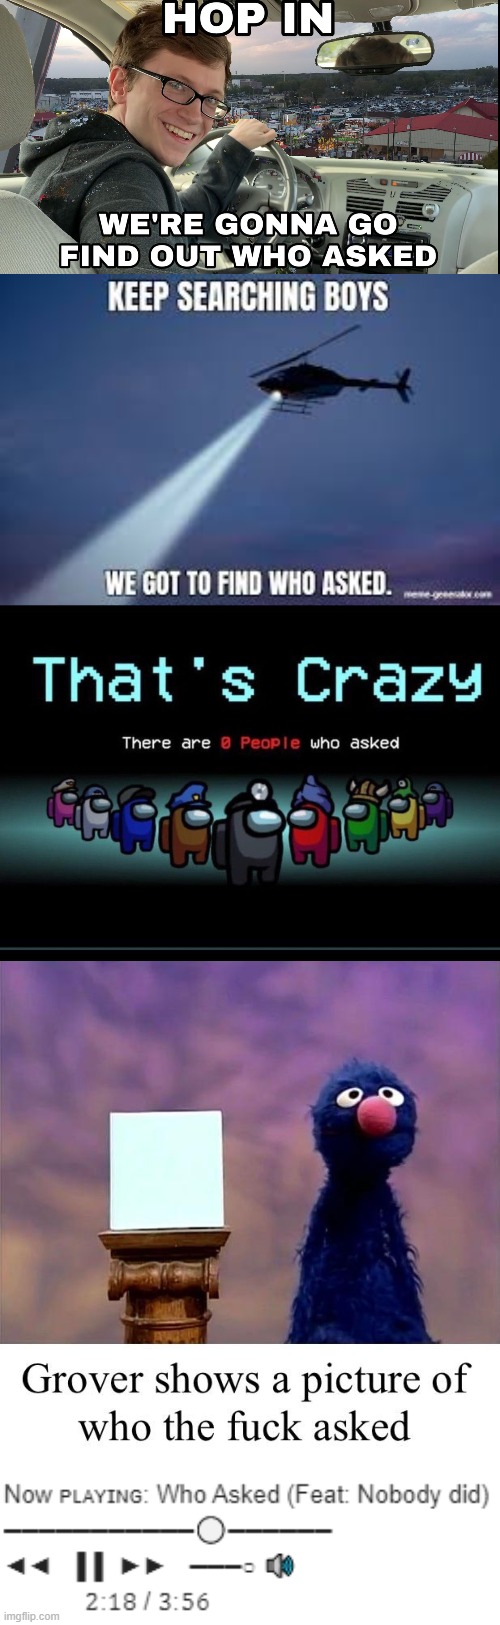 image tagged in hop in we're gonna find who asked,keep searching boys we gotta find,there are zero people who asked,grover who asked | made w/ Imgflip meme maker